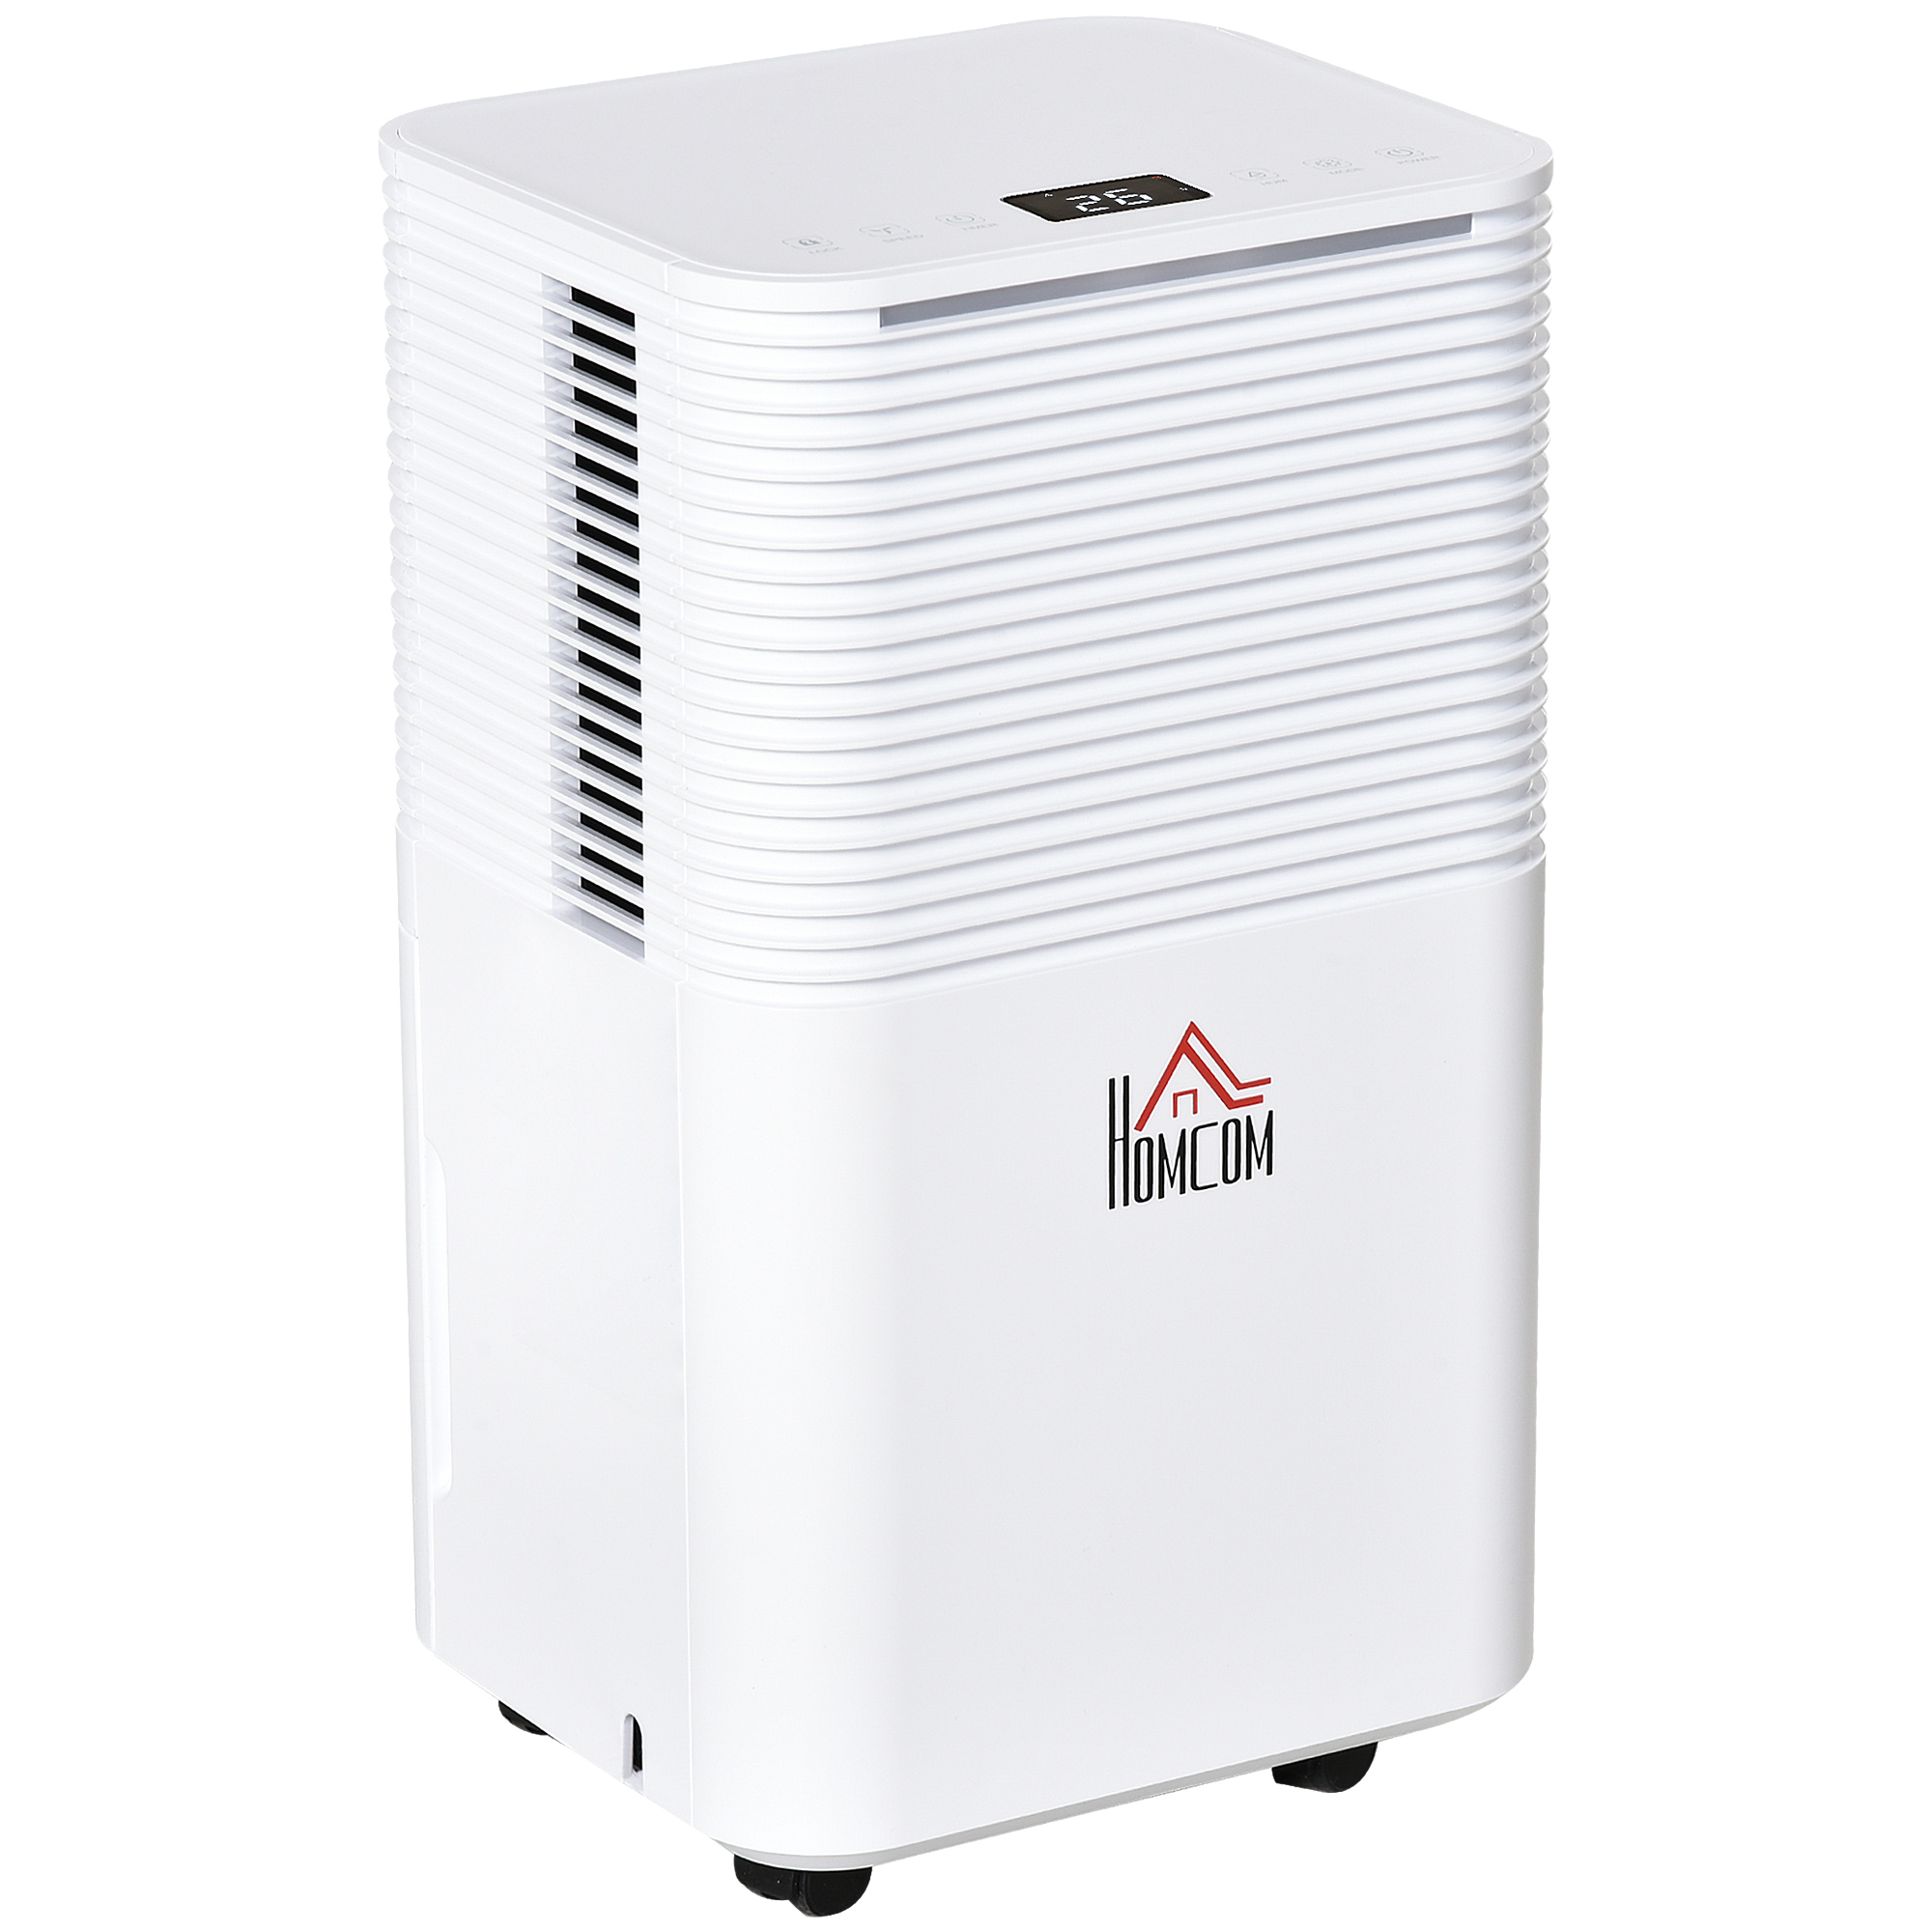 Homcom 10l/day 2000ml Portable Quiet Dehumidifier For Home Laundry Room Bedroom Basement, Electric Moisture Air De-humidifier With 3 Modes